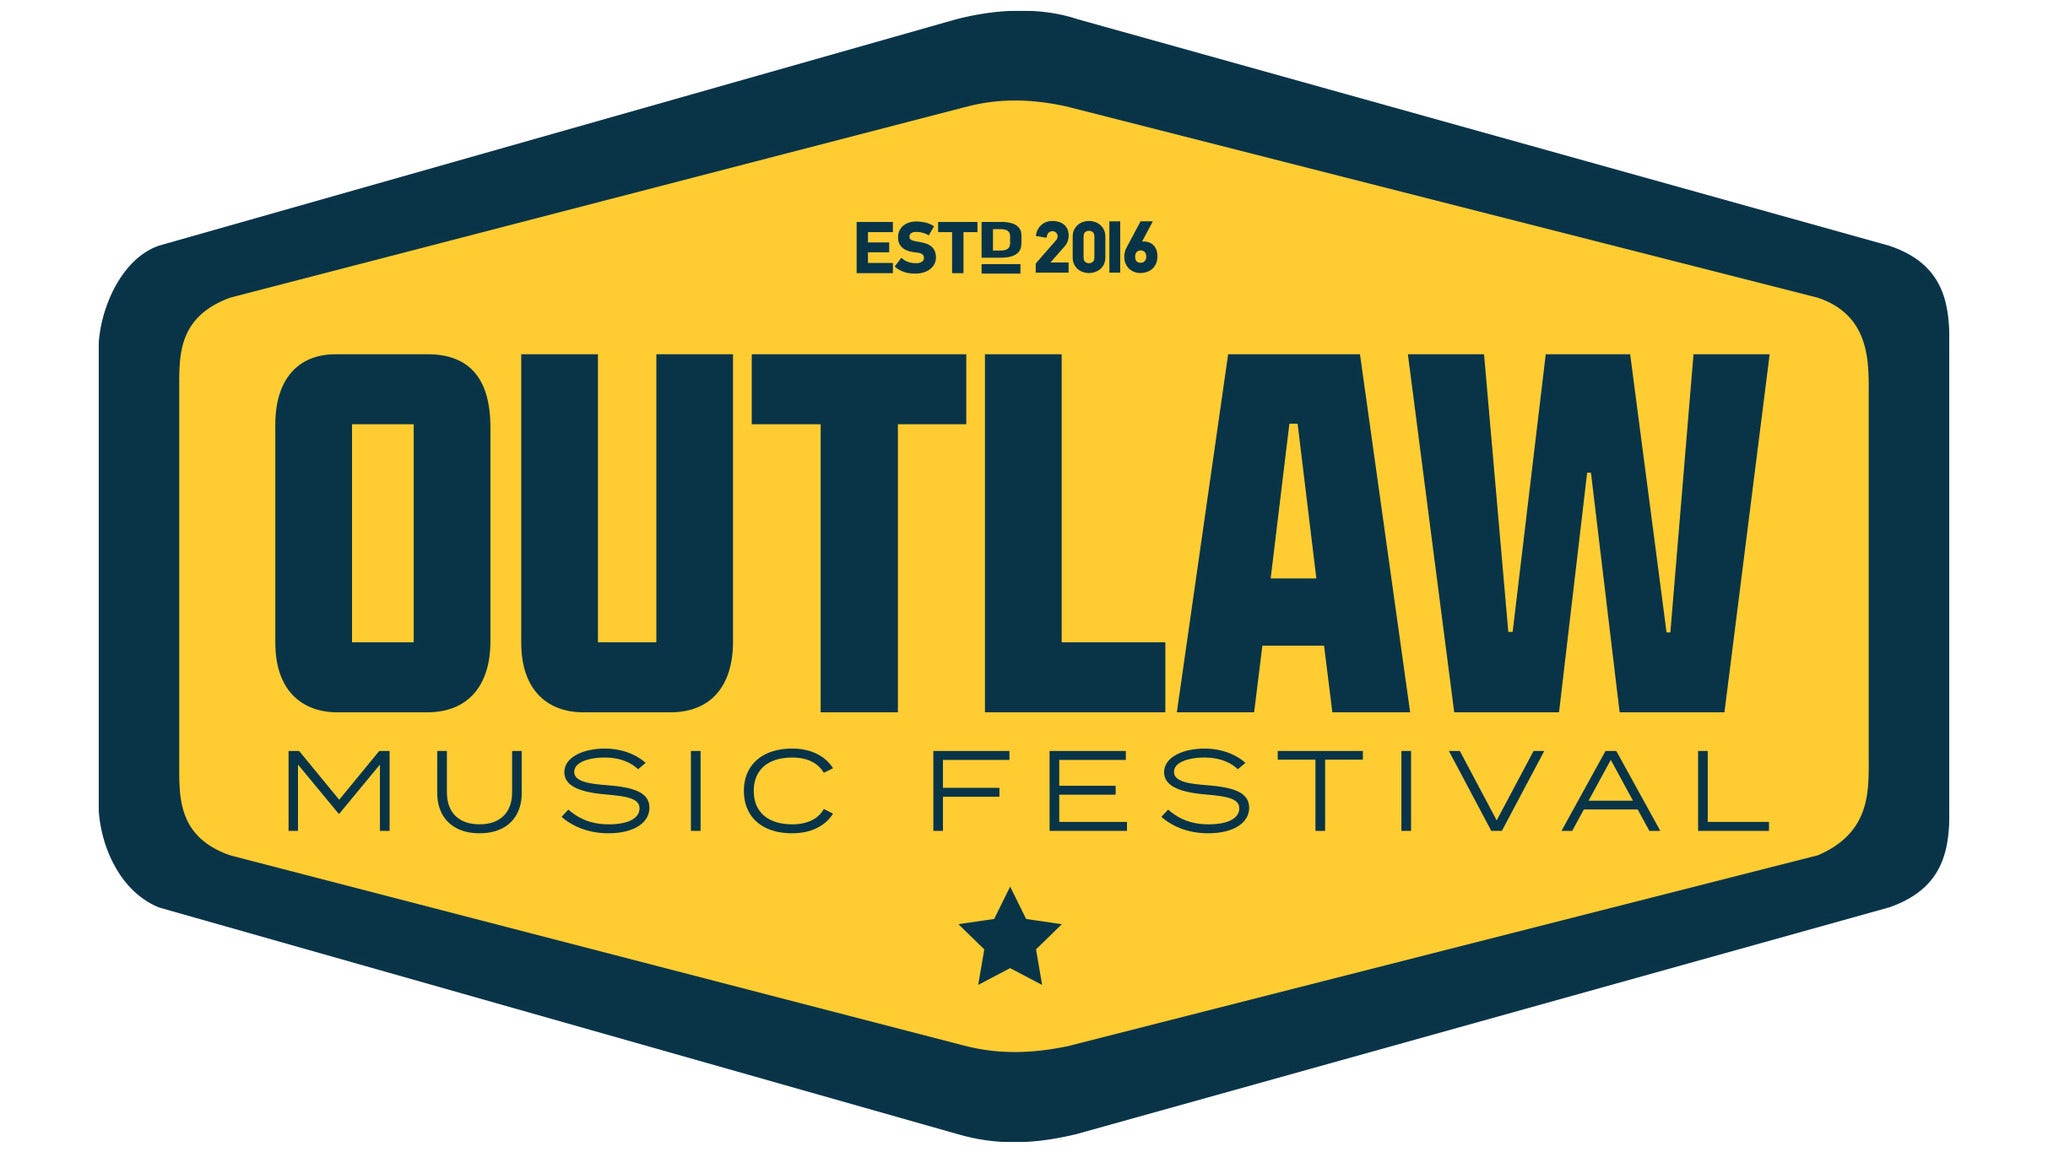 Outlaw ft: Willie Nelson, The Avett Brothers, Black Pumas & More pre-sale password for early tickets in Mountain View